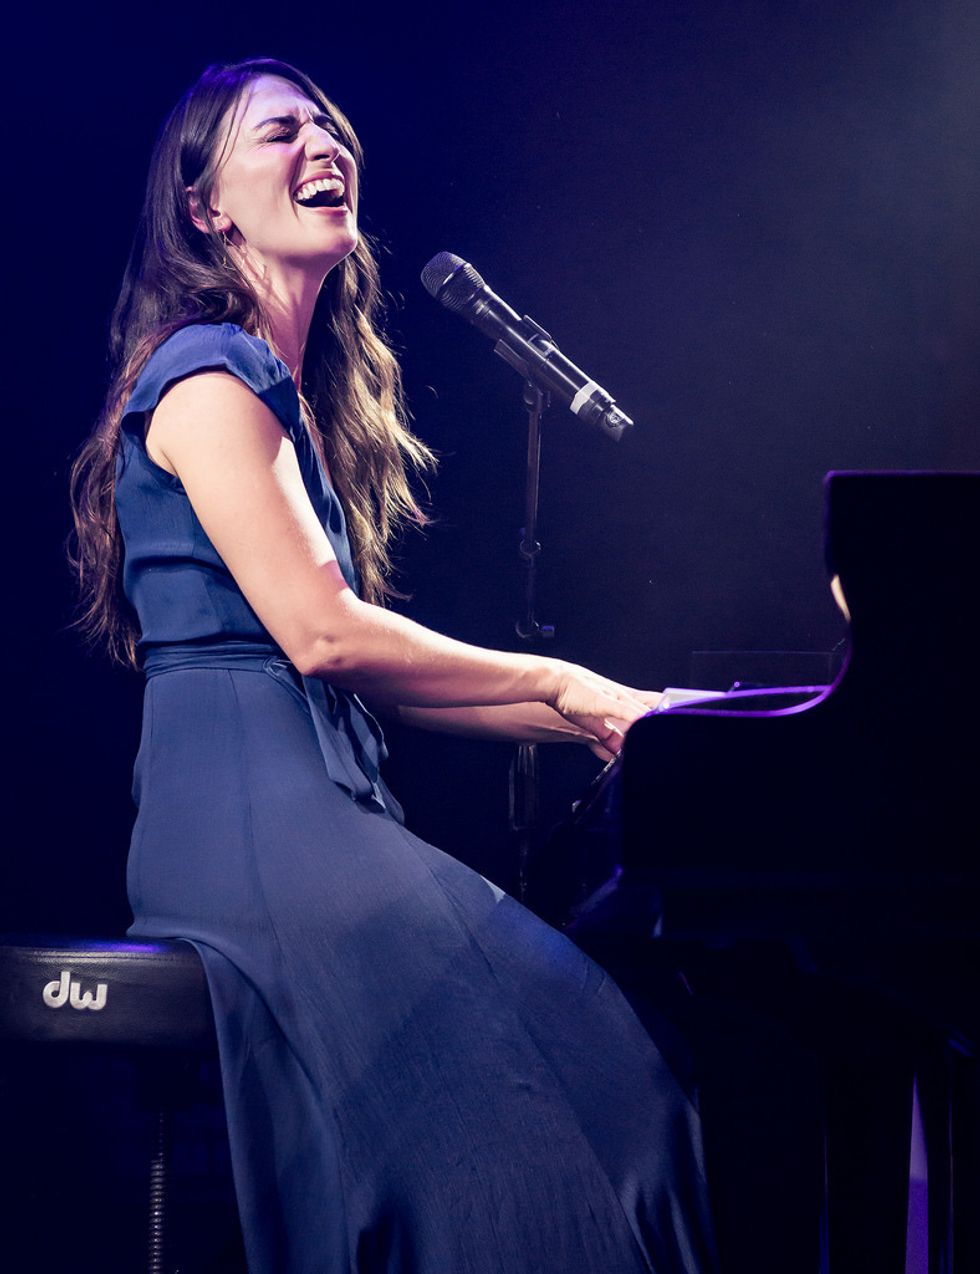 Sara Bareilles' New Song 'Armor' Is Just What Radio Needed